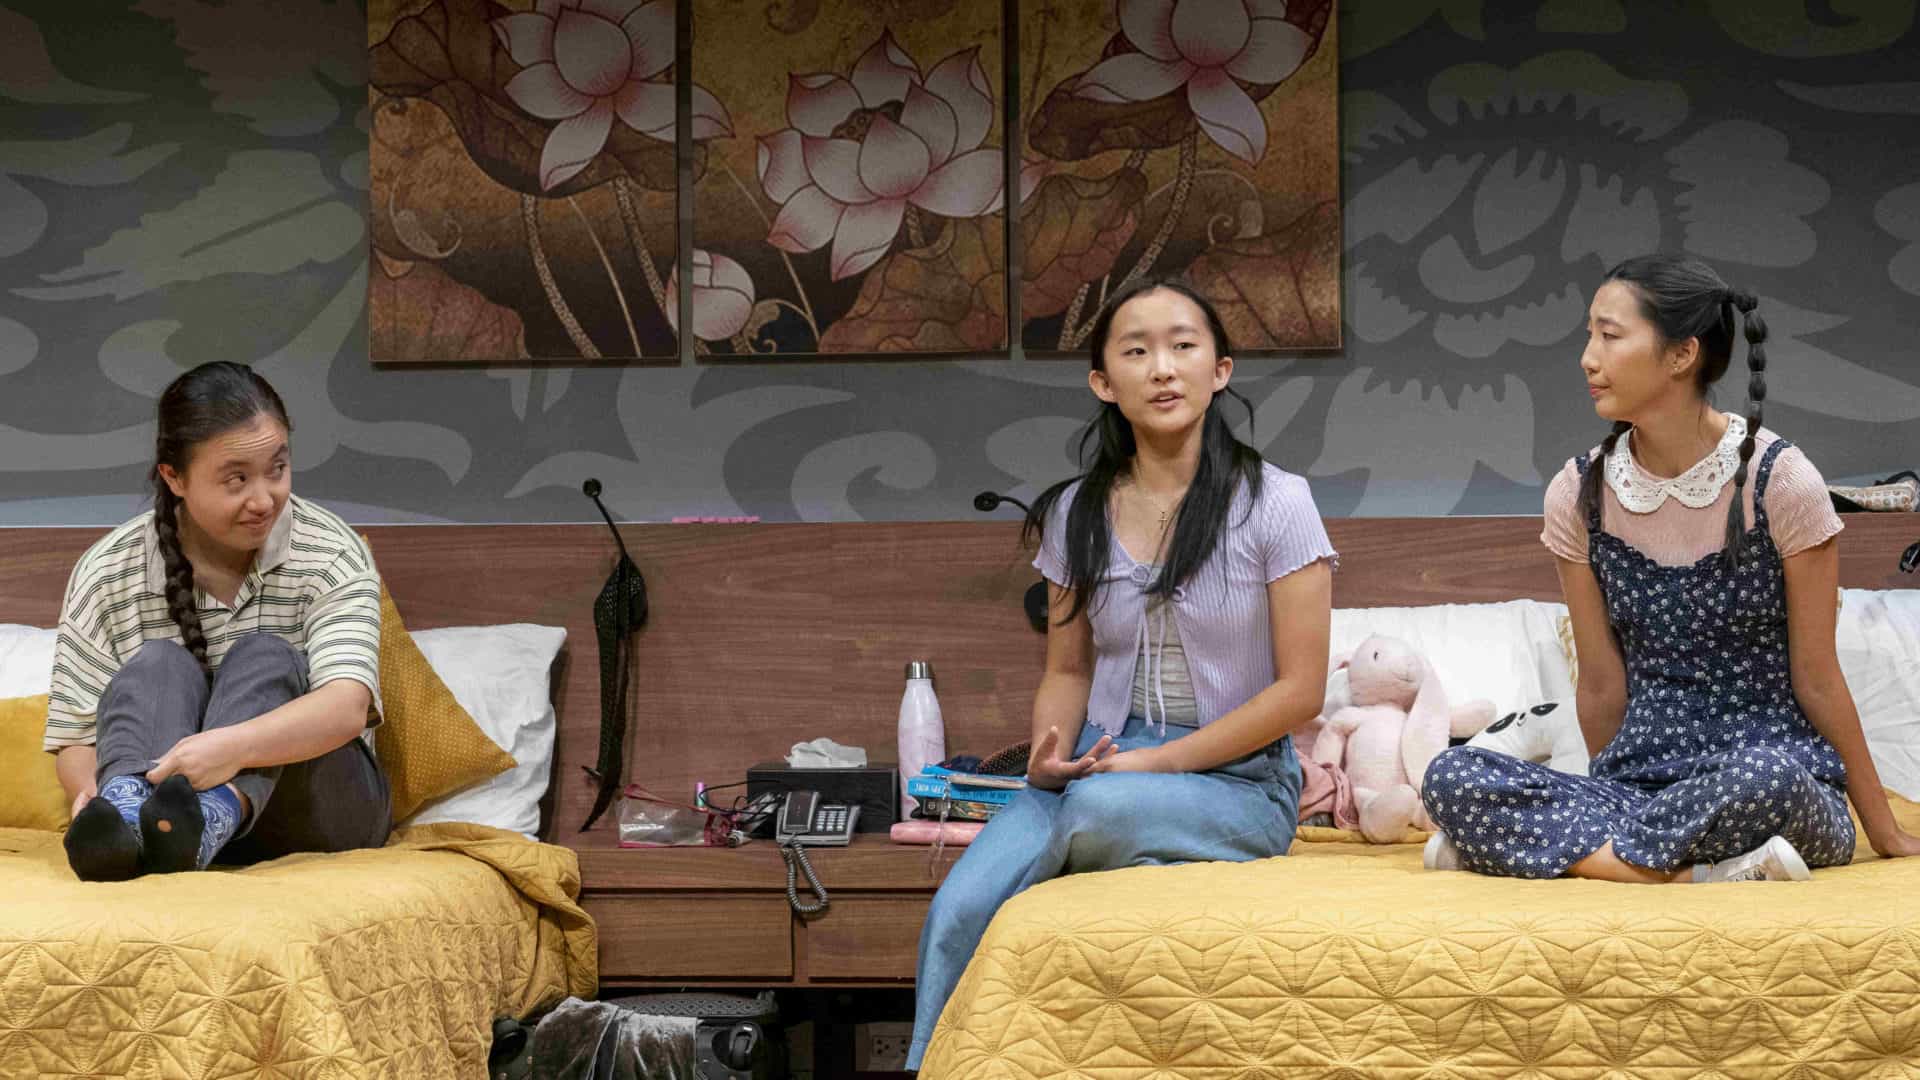 Emma Galbraith, Ji-young Yoo and Shirley Chen perform in Man of God by Anna Ouyang Moench. Press photo courtesy of Williamstown Theatre Festival